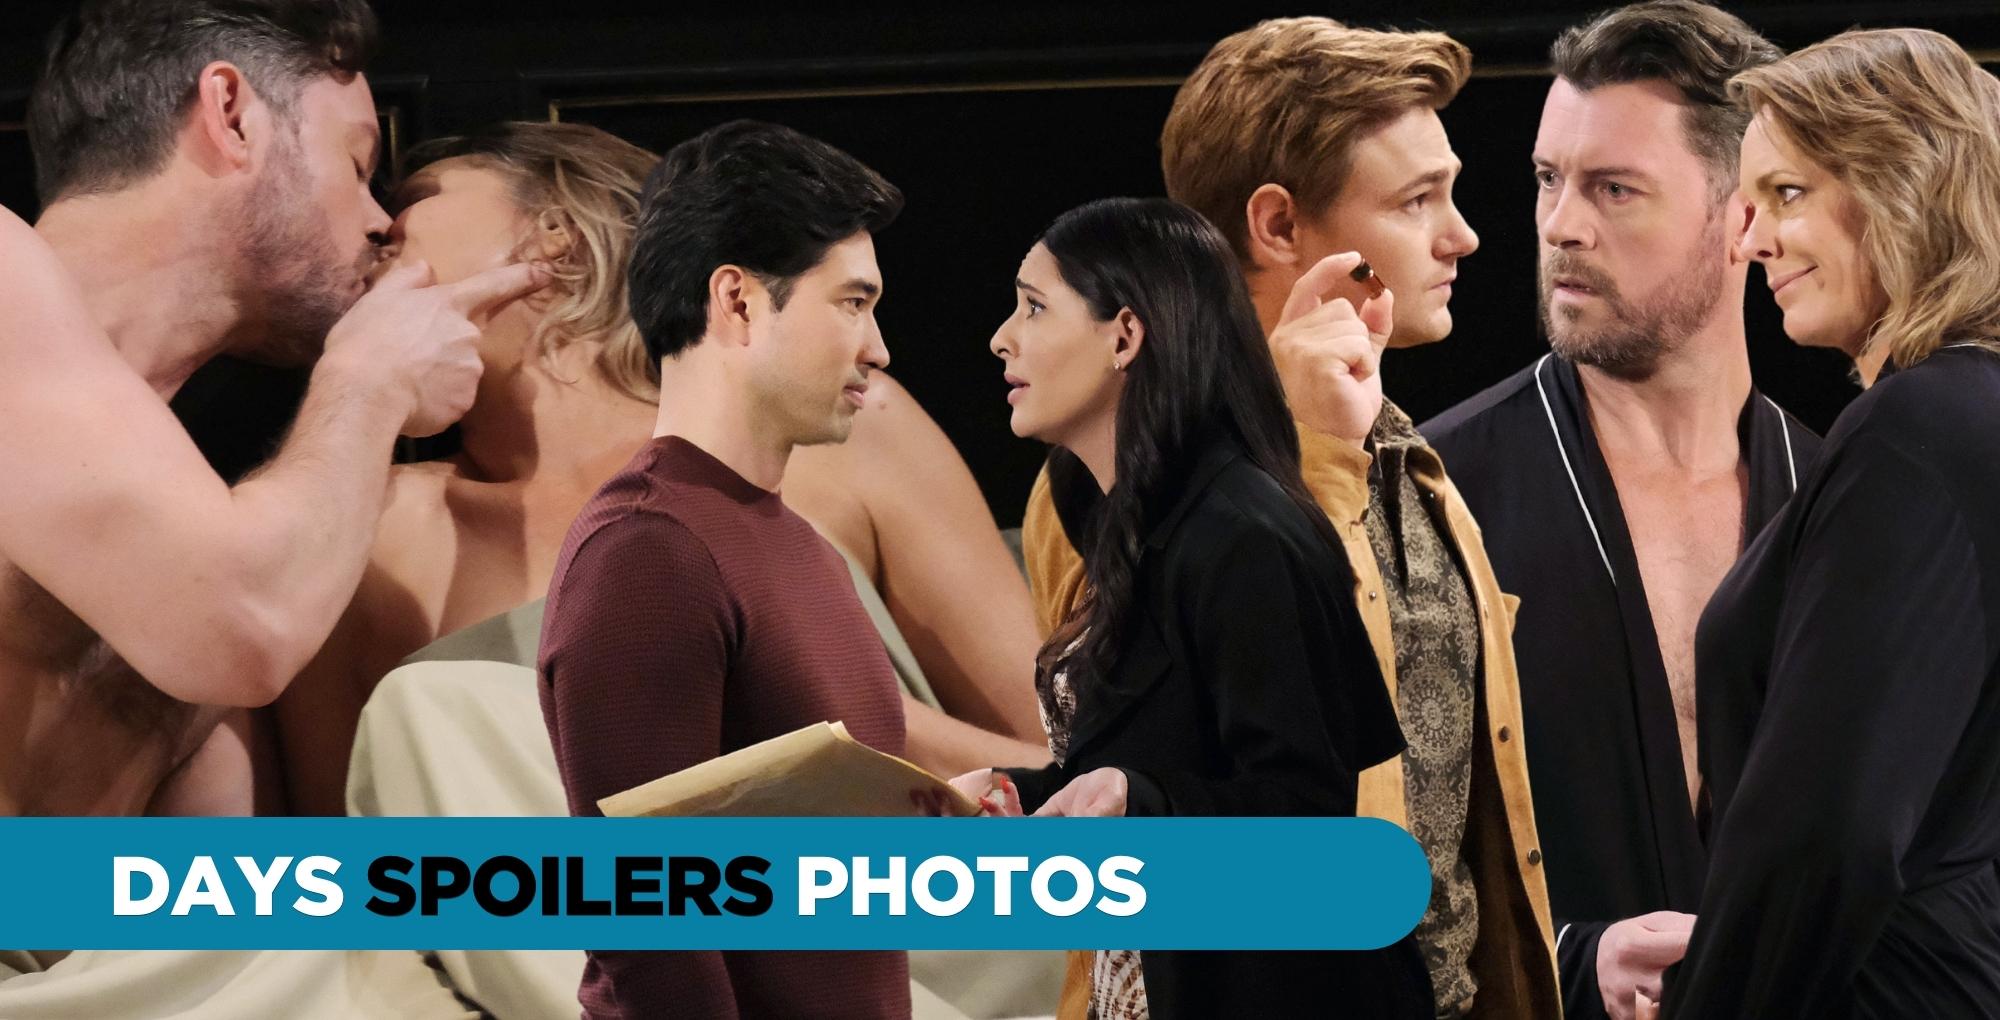 days spoilers photos for wednesday, february 22